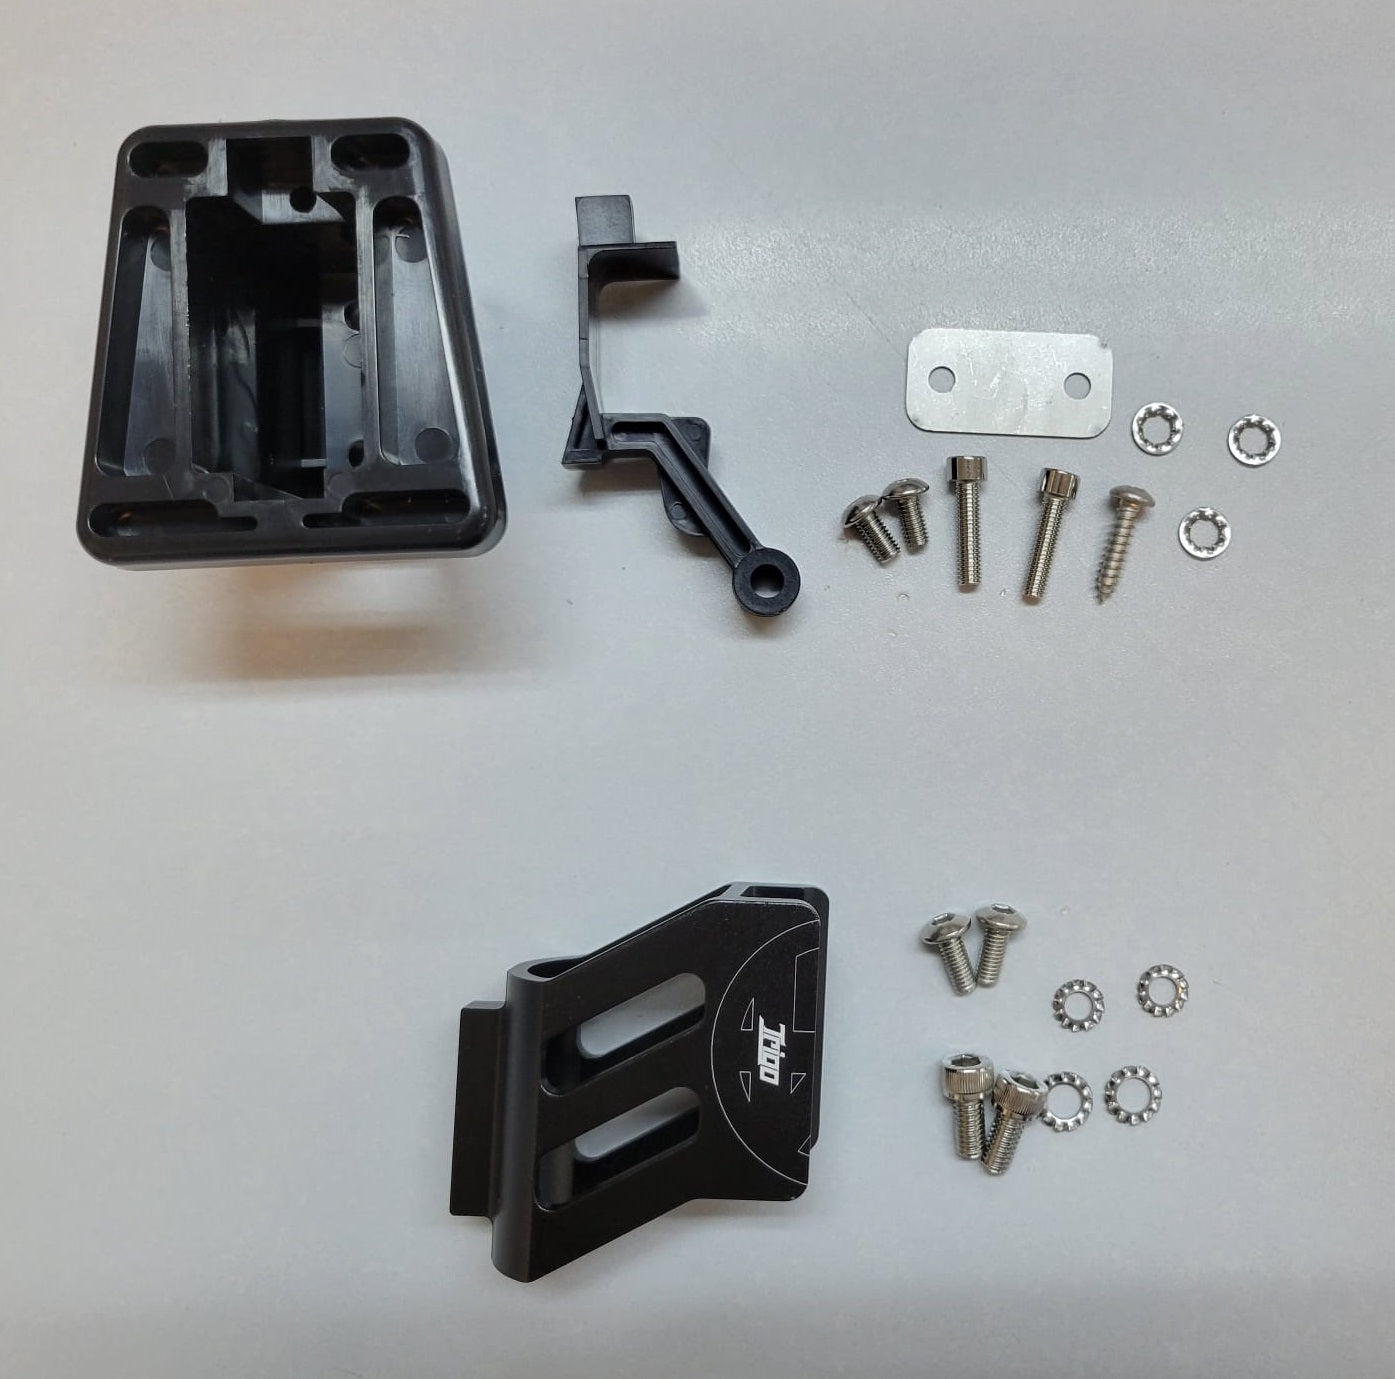 Folding Bike Fronted Mount Set for DAHON and TERN Folding Bike Fronted Mount Set for DAHON and TERN